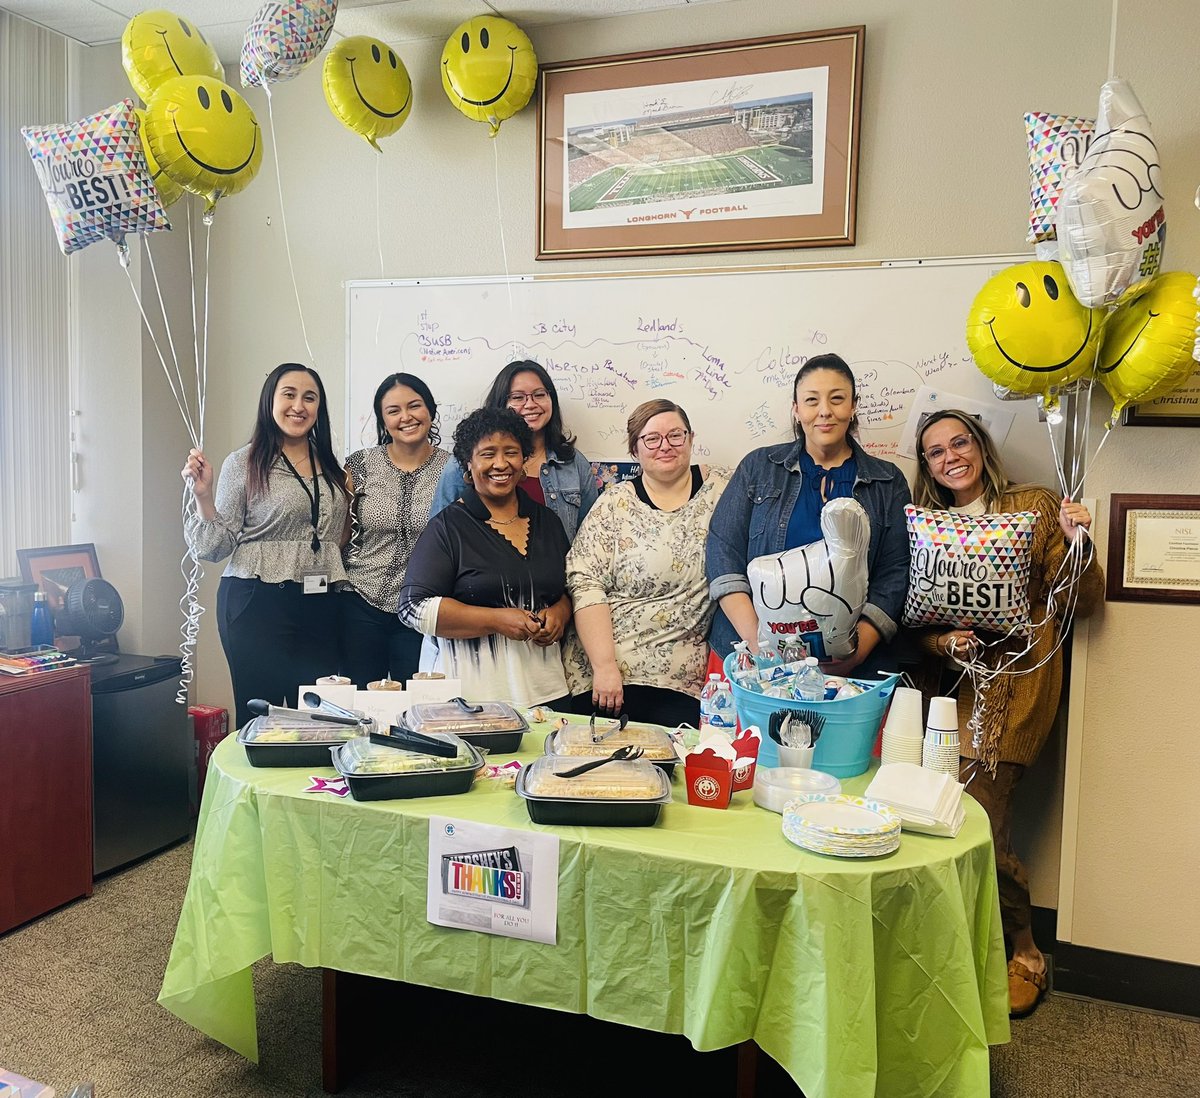 Celebrating our CIAE office assistants today! We appreciate all the hard work they put in each day to support our department and managers! Love our ladies! ♥️ @SBCountySchools